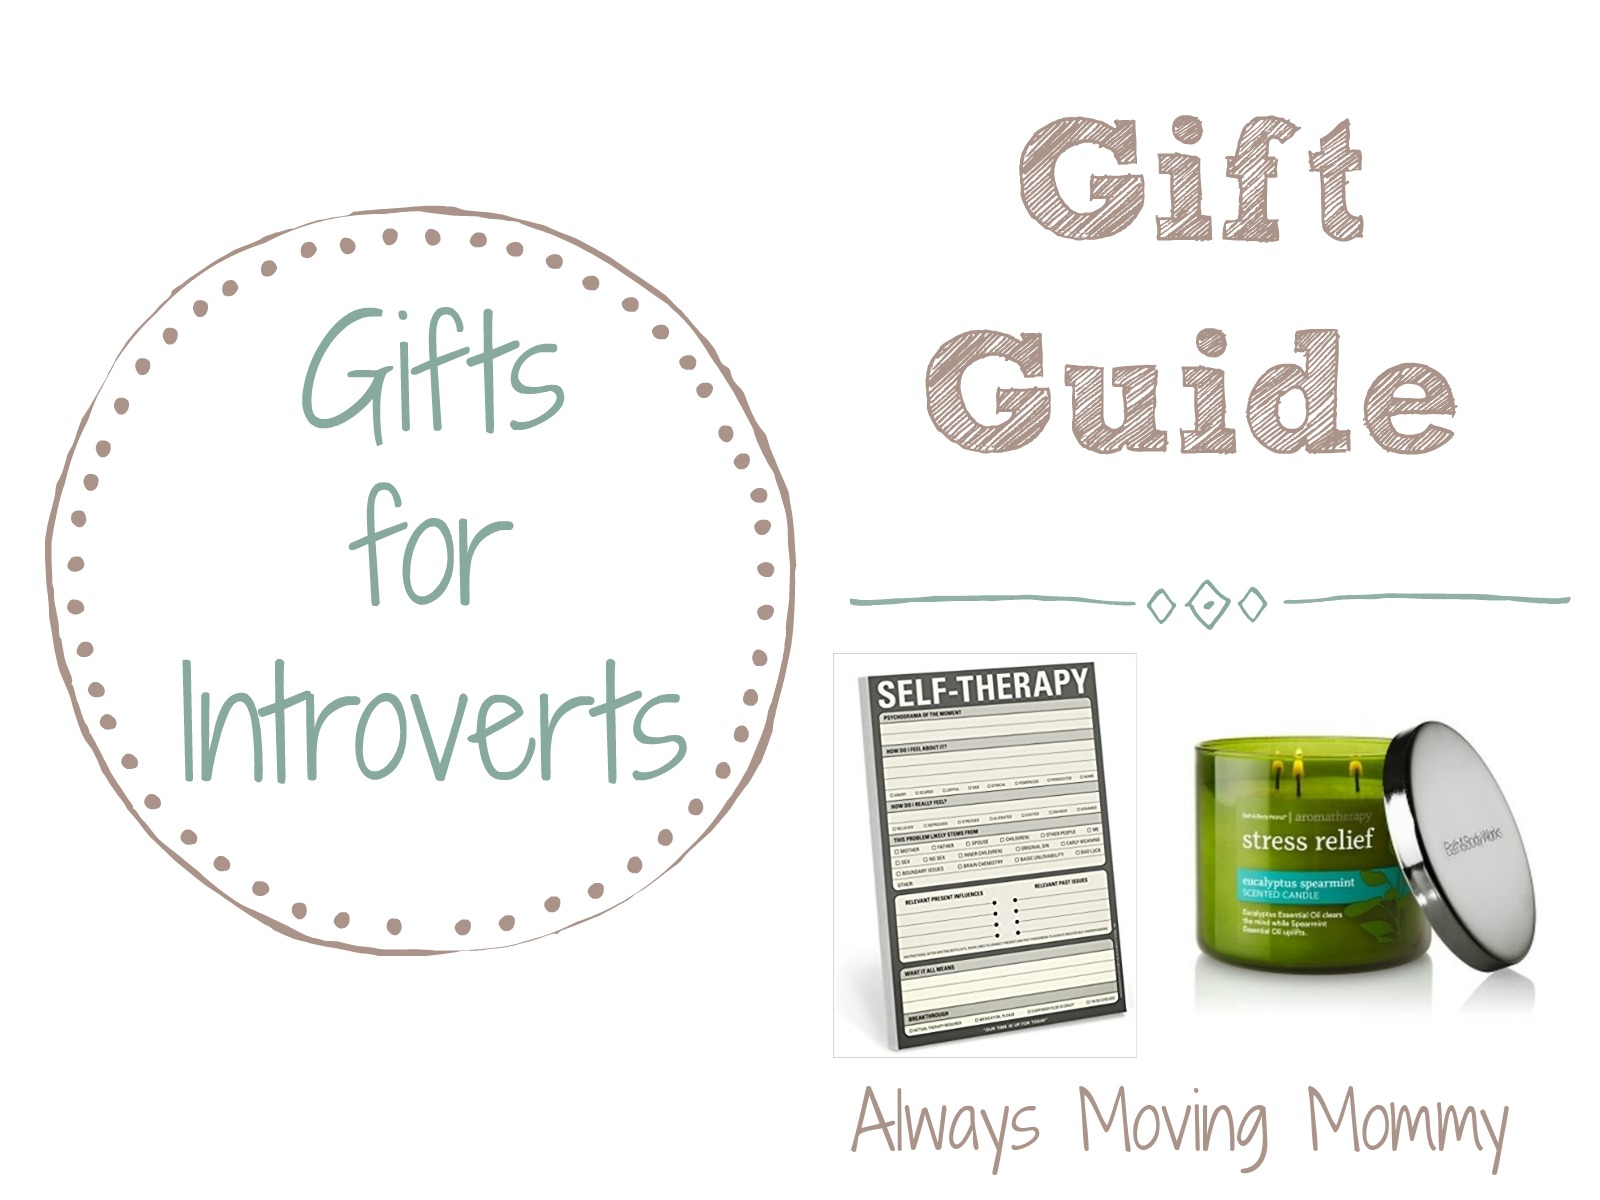 Guide Guide: Gift Ideas for Introverts | Always Moving Mommy | Know someone who's an introvert but not sure what to get them? These ideas will help.